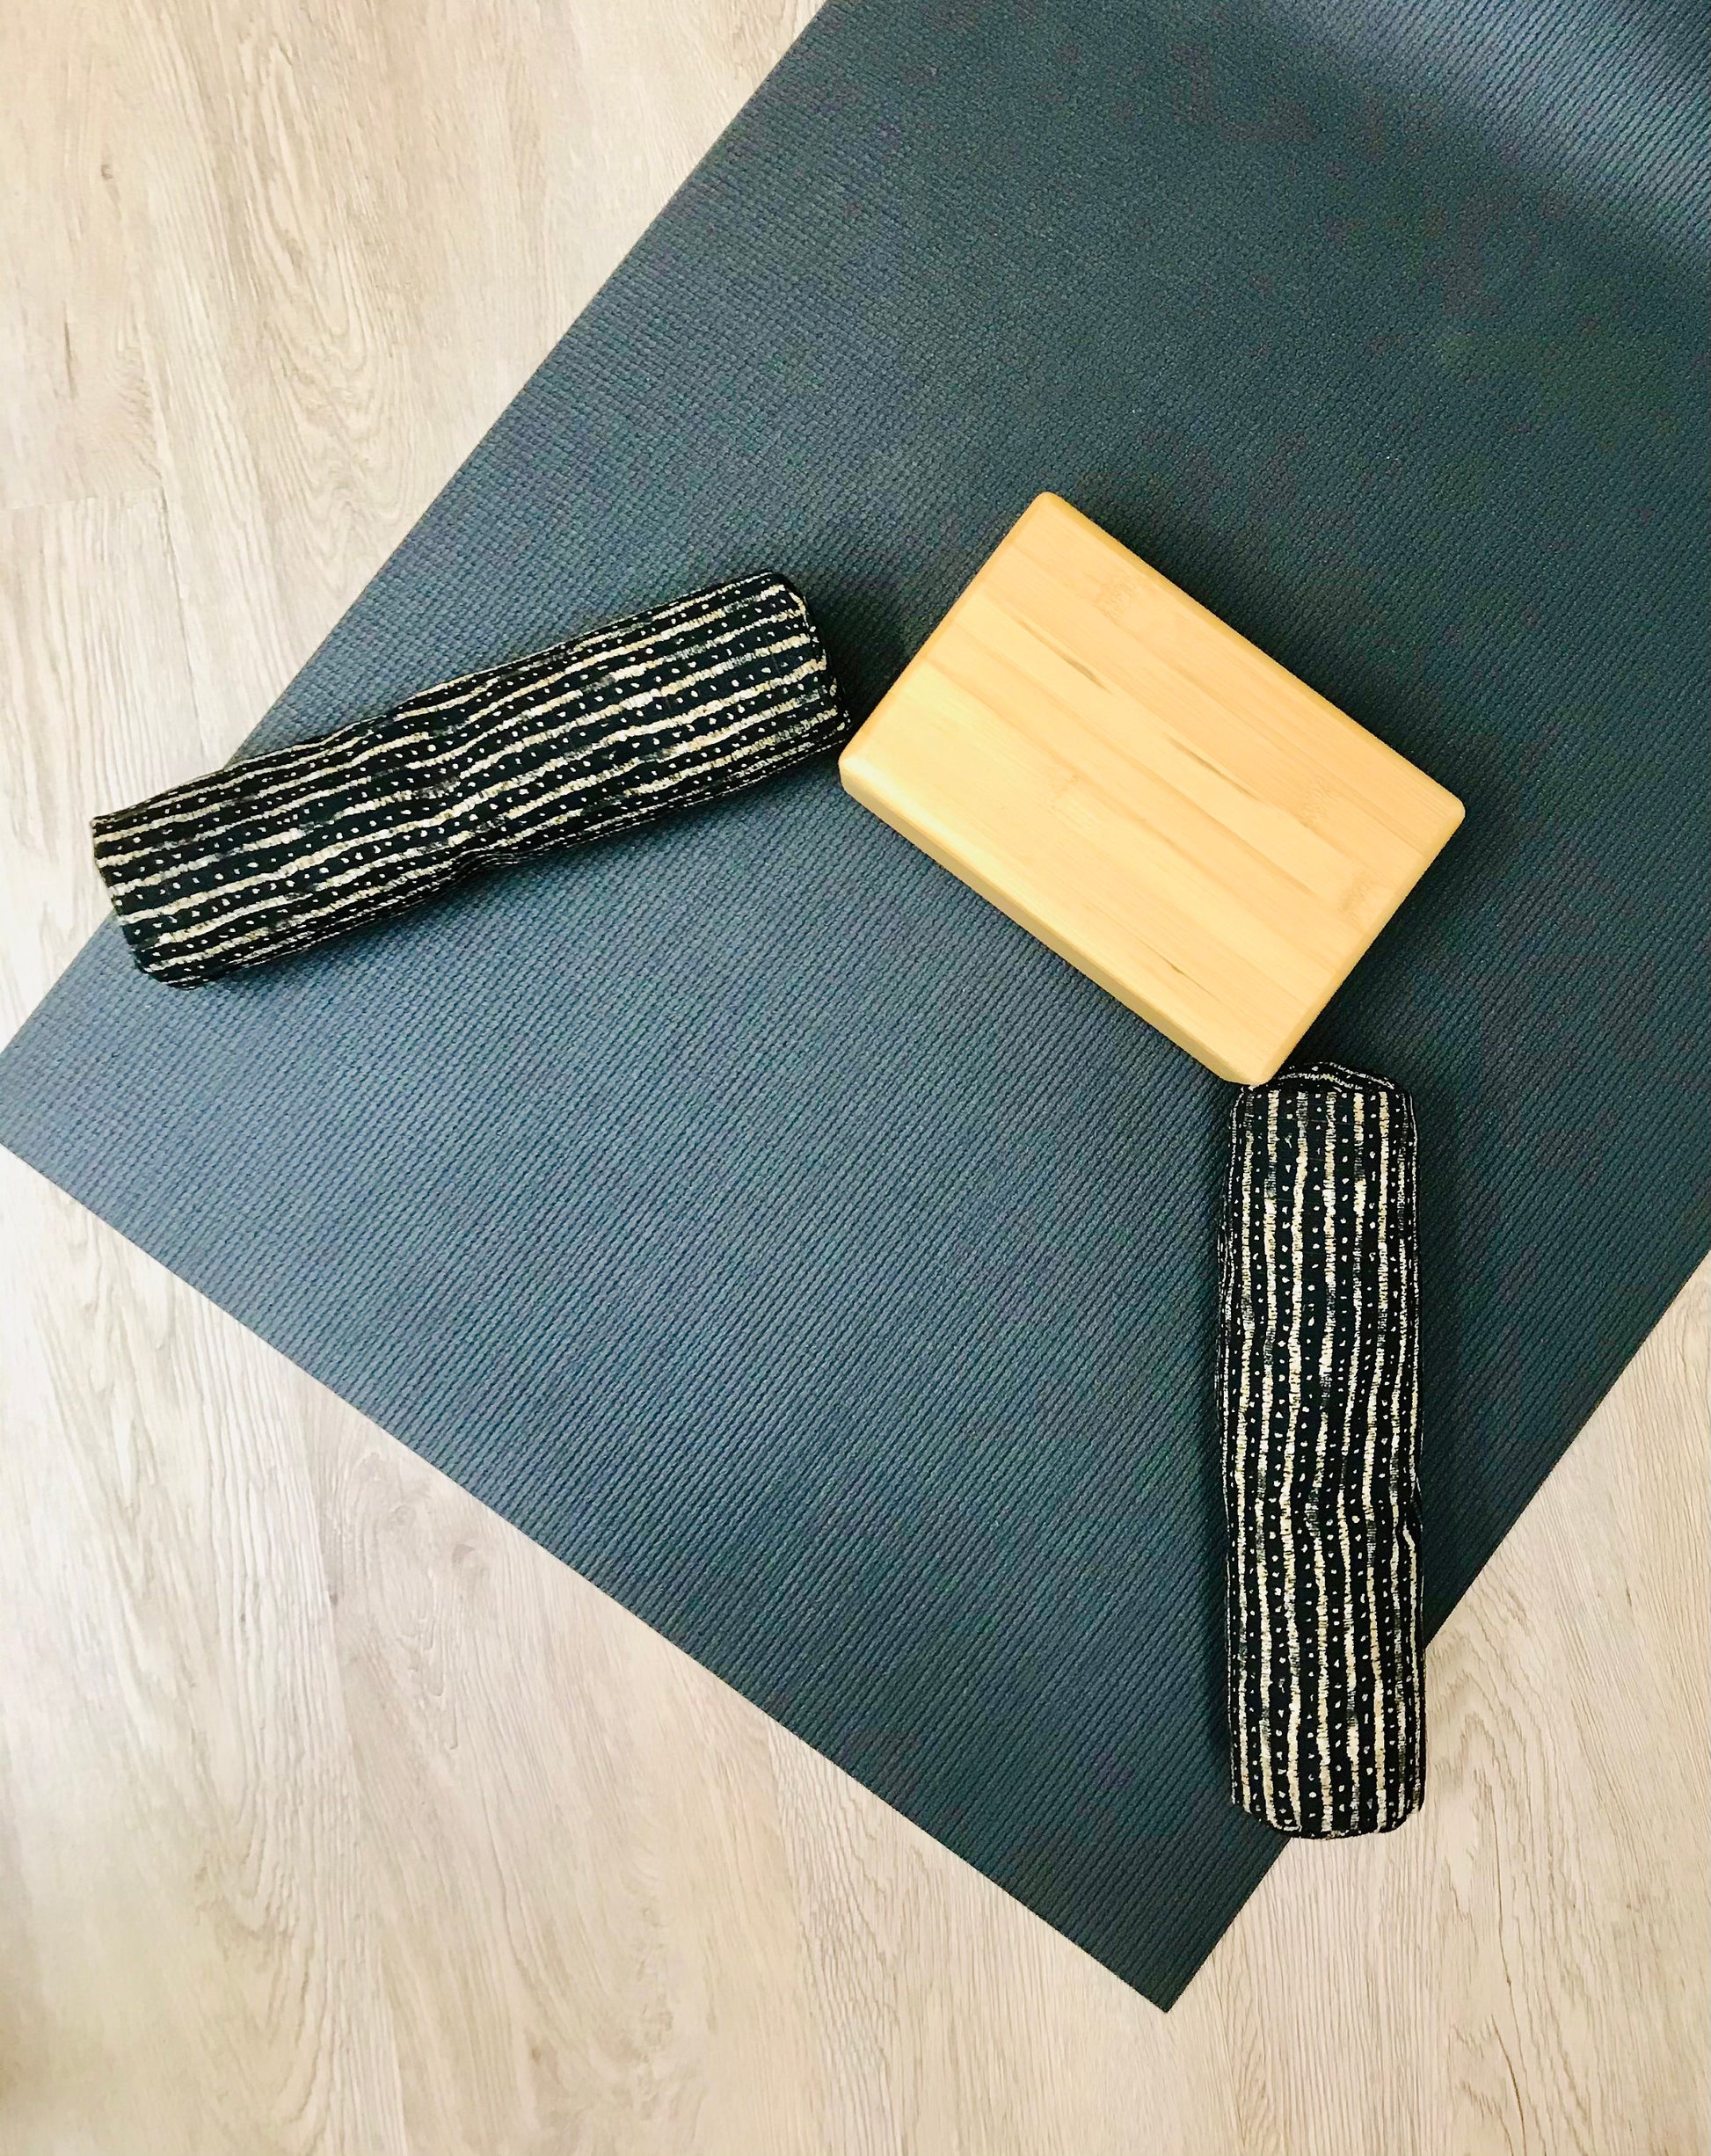 Mini yoga bolster in cotton canvas fabric, black and beige stripe fabric. Cushion and support the body in the practice of yoga and meditation.Removeable cover. Made in Canada by My Yoga Room Elements